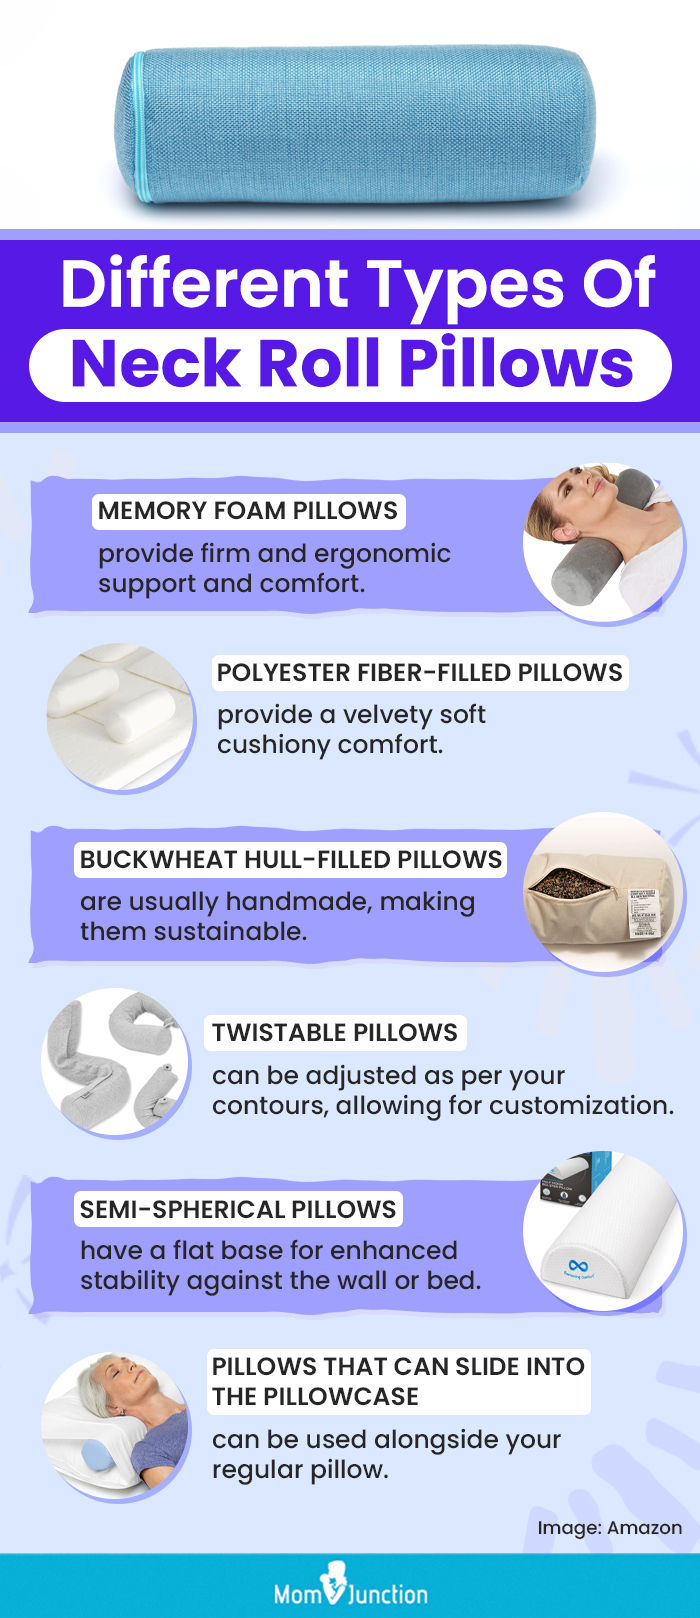 Foam Neck Roll Pillows - Different Shapes & Sizes